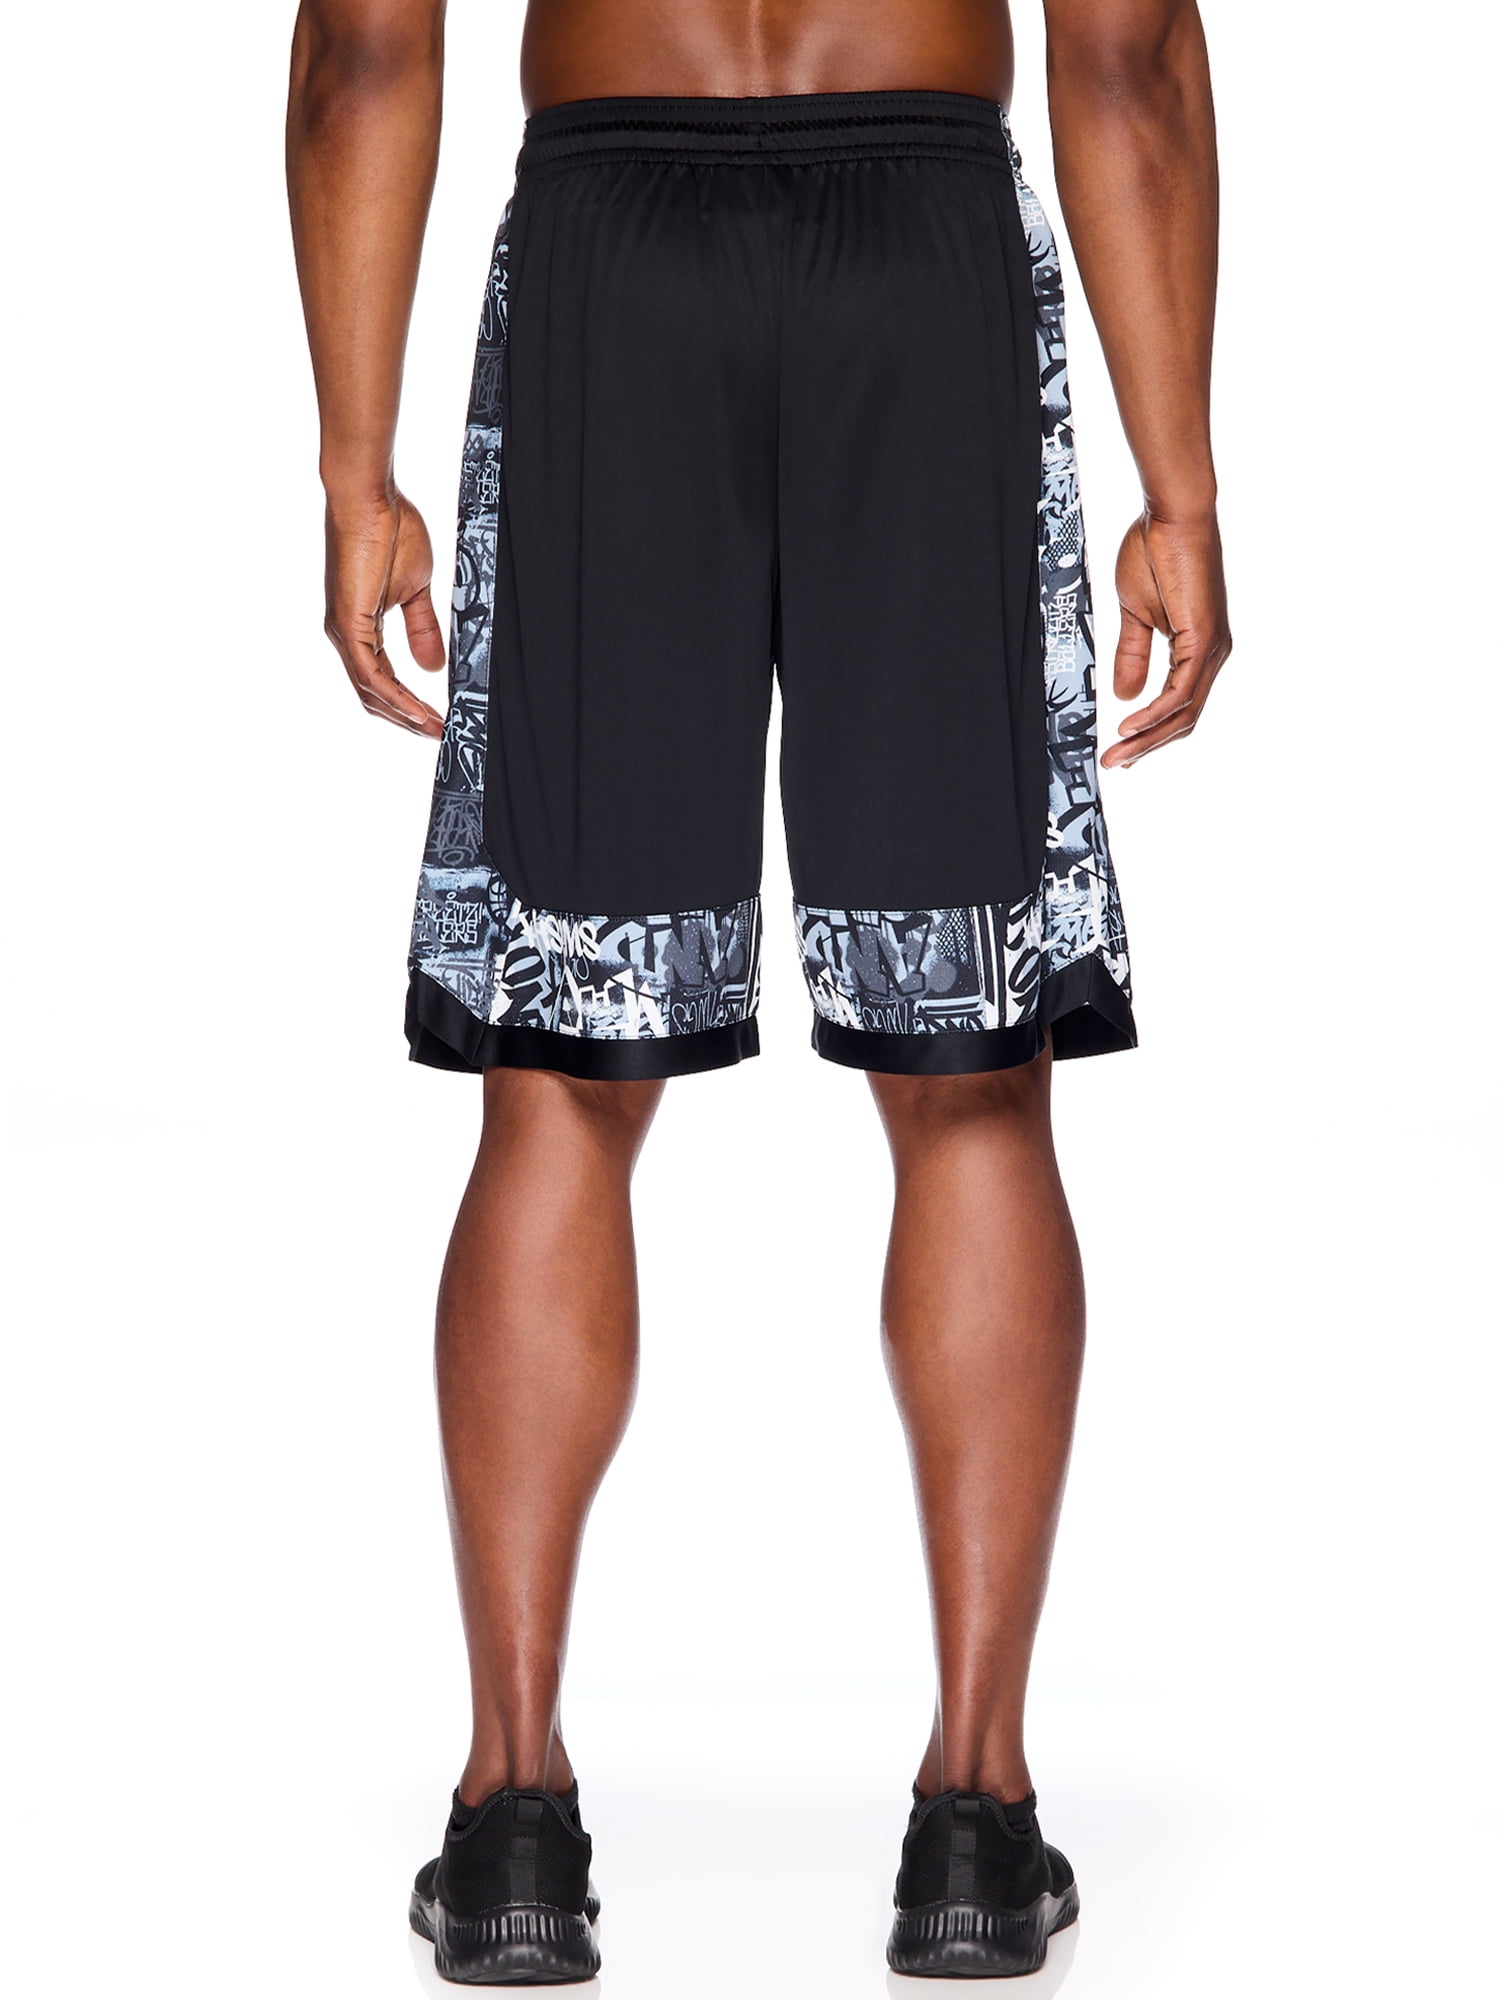 And1 Mens Pull Back Dribble Basketball Shorts, 11 Inseam, Sizes S-3XL 